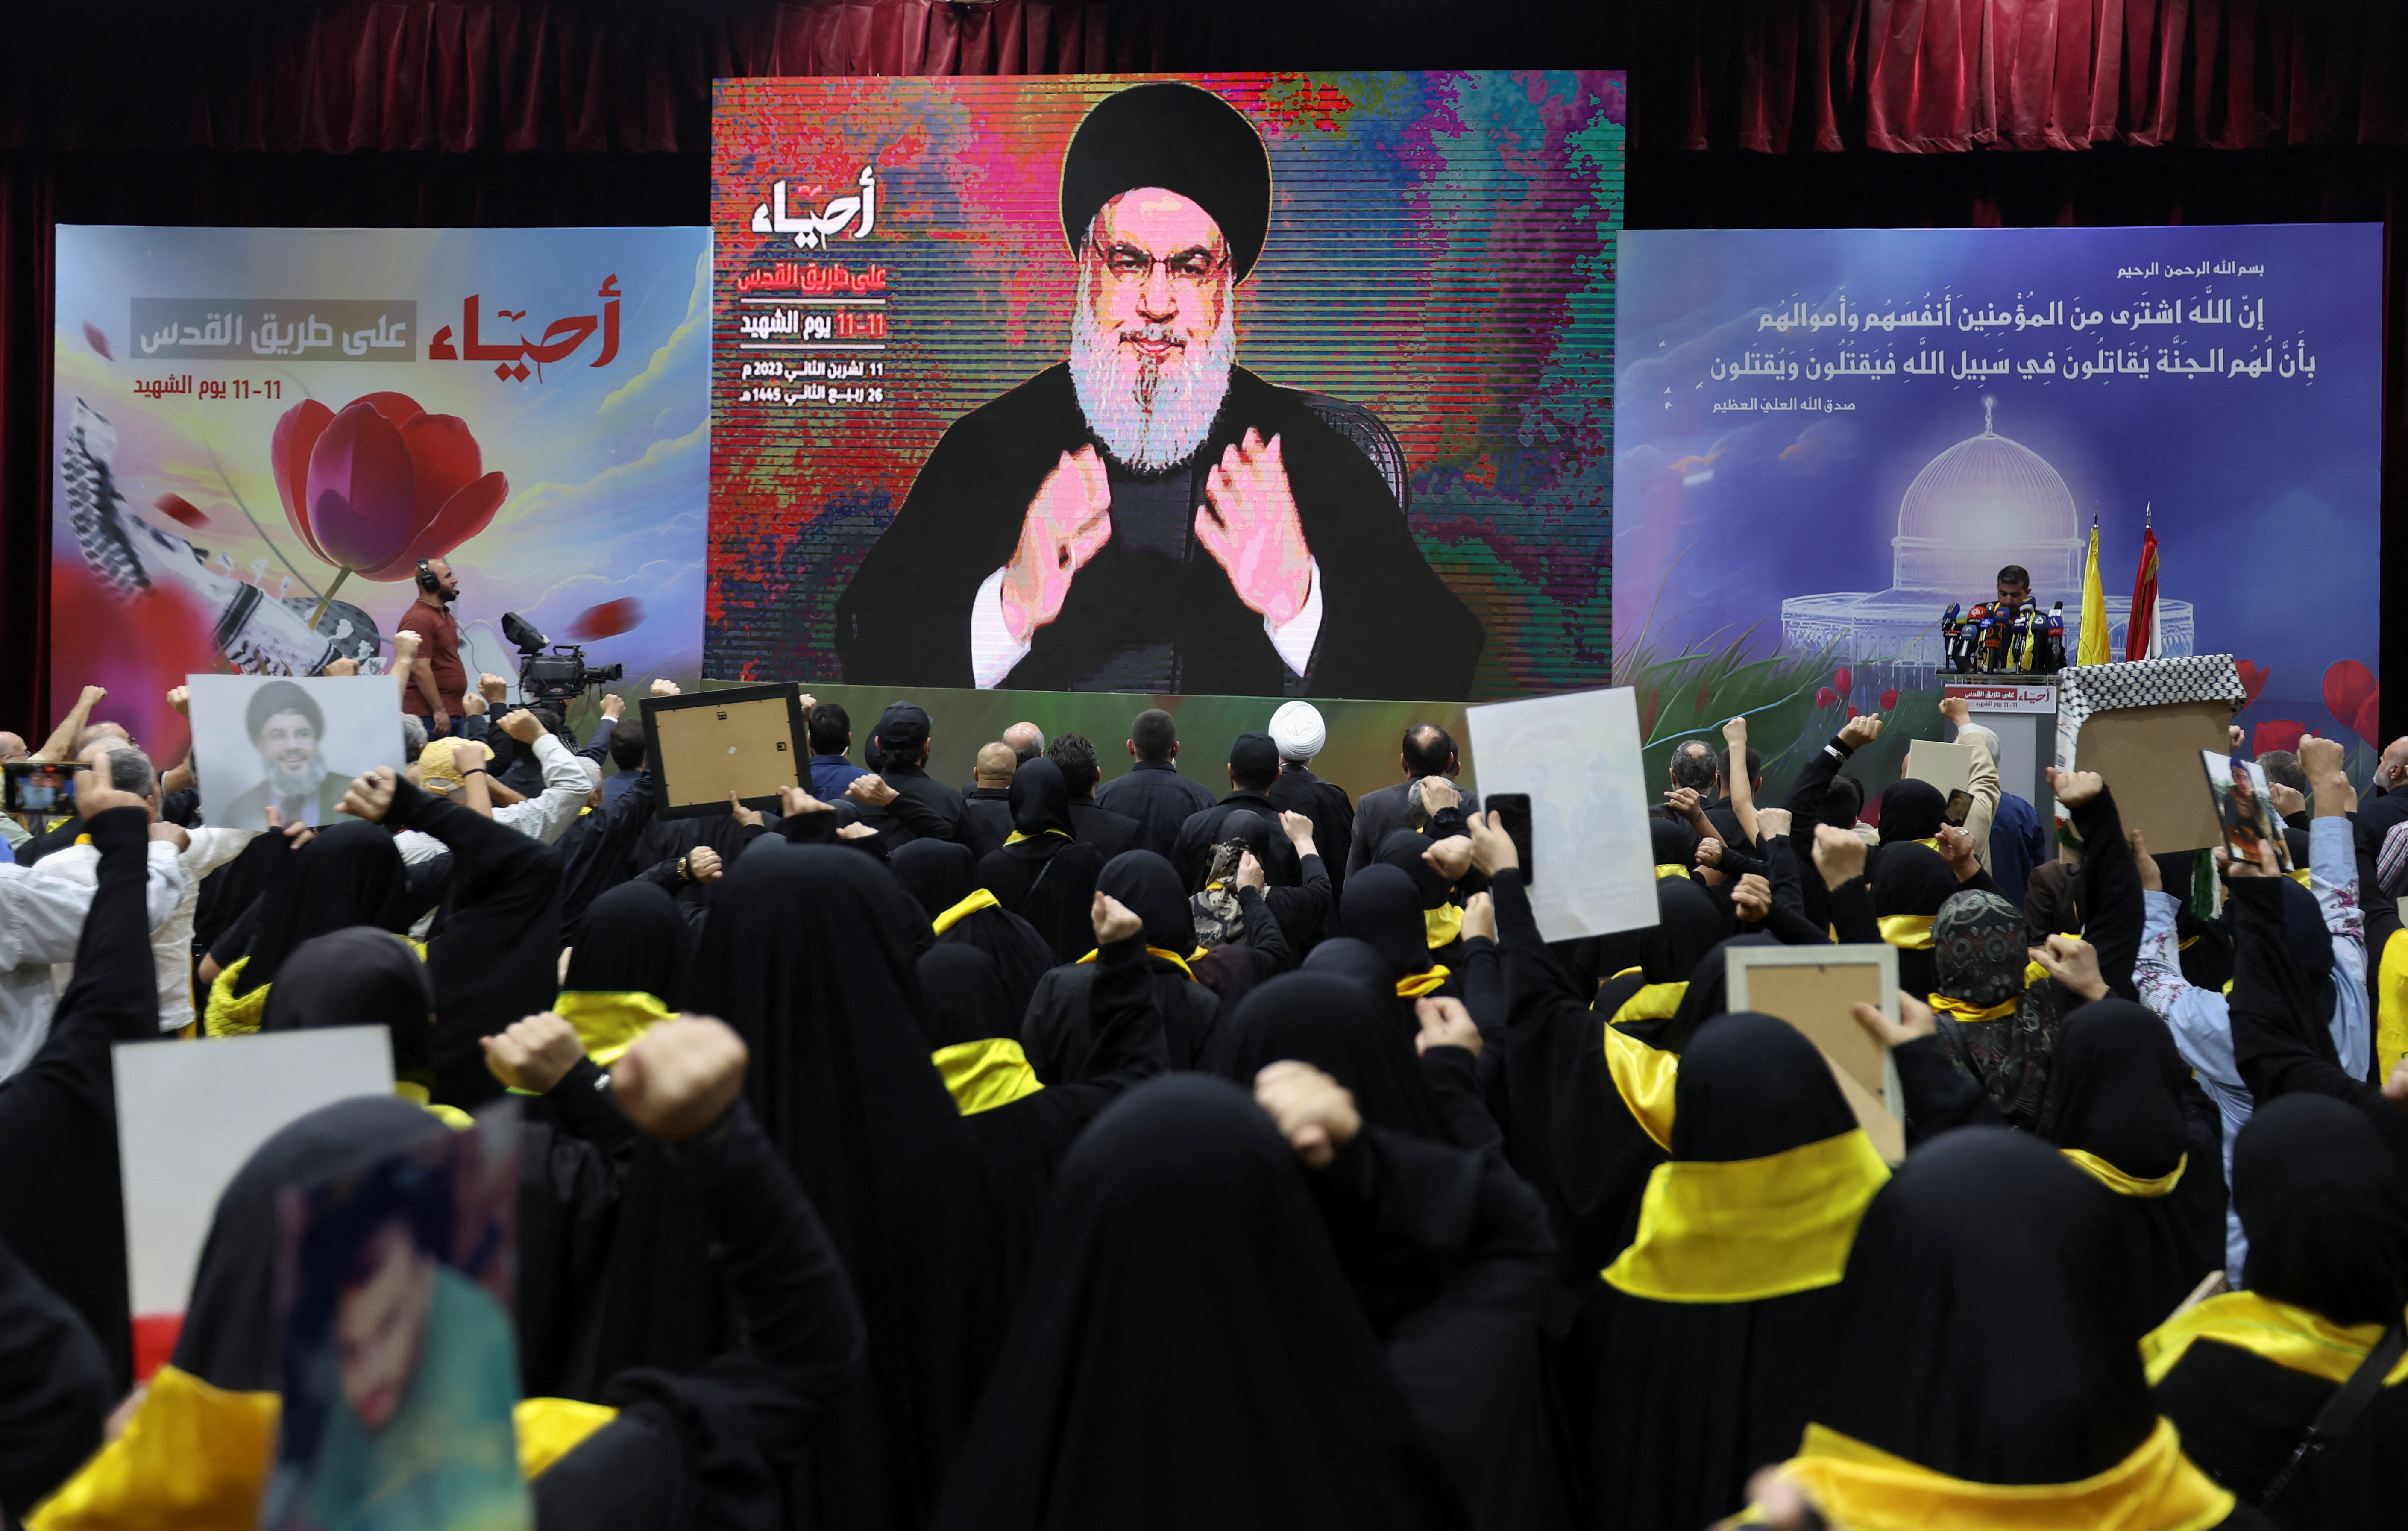 Supporters watch Hezbollah Secretary General Hassan Nasrallah deliver an address in Lebanon on November 11. 